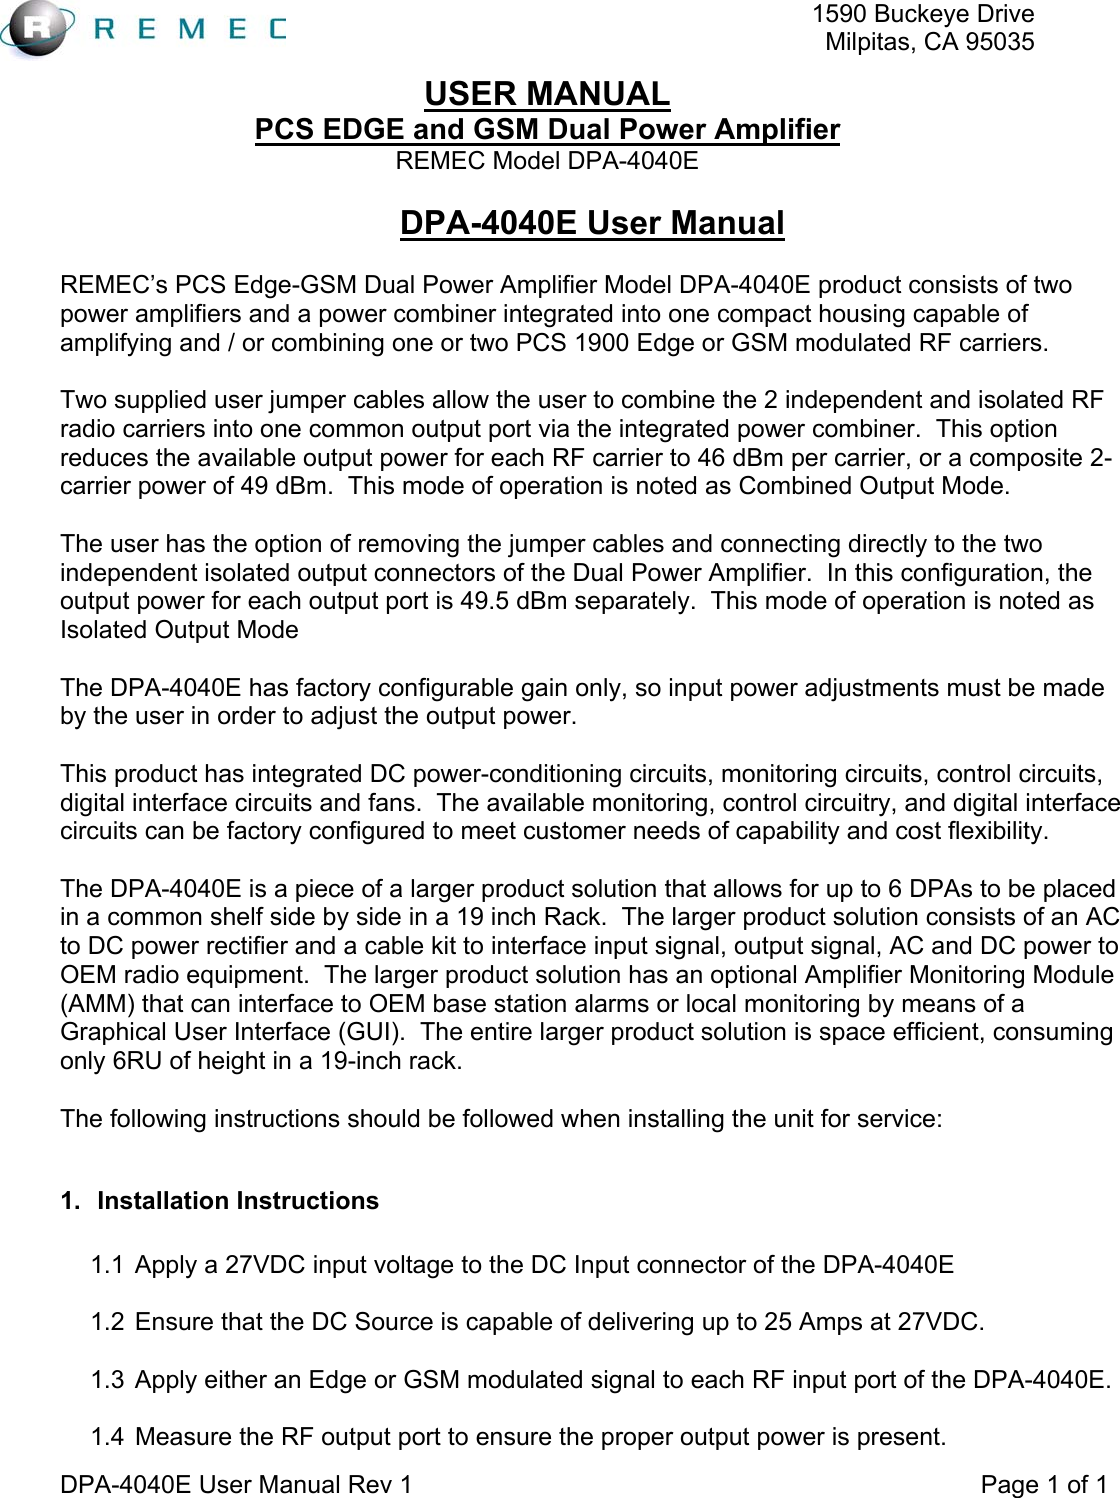   1590 Buckeye DriveMilpitas, CA 95035USER MANUAL PCS EDGE and GSM Dual Power Amplifier REMEC Model DPA-4040E  DPA-4040E User Manual Rev 1                                                                                 Page 1 of 1 DPA-4040E User Manual  REMEC’s PCS Edge-GSM Dual Power Amplifier Model DPA-4040E product consists of two power amplifiers and a power combiner integrated into one compact housing capable of amplifying and / or combining one or two PCS 1900 Edge or GSM modulated RF carriers.  Two supplied user jumper cables allow the user to combine the 2 independent and isolated RF radio carriers into one common output port via the integrated power combiner.  This option reduces the available output power for each RF carrier to 46 dBm per carrier, or a composite 2- carrier power of 49 dBm.  This mode of operation is noted as Combined Output Mode.  The user has the option of removing the jumper cables and connecting directly to the two independent isolated output connectors of the Dual Power Amplifier.  In this configuration, the output power for each output port is 49.5 dBm separately.  This mode of operation is noted as Isolated Output Mode  The DPA-4040E has factory configurable gain only, so input power adjustments must be made by the user in order to adjust the output power.  This product has integrated DC power-conditioning circuits, monitoring circuits, control circuits, digital interface circuits and fans.  The available monitoring, control circuitry, and digital interface circuits can be factory configured to meet customer needs of capability and cost flexibility.  The DPA-4040E is a piece of a larger product solution that allows for up to 6 DPAs to be placed in a common shelf side by side in a 19 inch Rack.  The larger product solution consists of an AC to DC power rectifier and a cable kit to interface input signal, output signal, AC and DC power to OEM radio equipment.  The larger product solution has an optional Amplifier Monitoring Module (AMM) that can interface to OEM base station alarms or local monitoring by means of a Graphical User Interface (GUI).  The entire larger product solution is space efficient, consuming only 6RU of height in a 19-inch rack.  The following instructions should be followed when installing the unit for service:  1. Installation Instructions  1.1  Apply a 27VDC input voltage to the DC Input connector of the DPA-4040E  1.2  Ensure that the DC Source is capable of delivering up to 25 Amps at 27VDC.  1.3  Apply either an Edge or GSM modulated signal to each RF input port of the DPA-4040E.  1.4  Measure the RF output port to ensure the proper output power is present. 